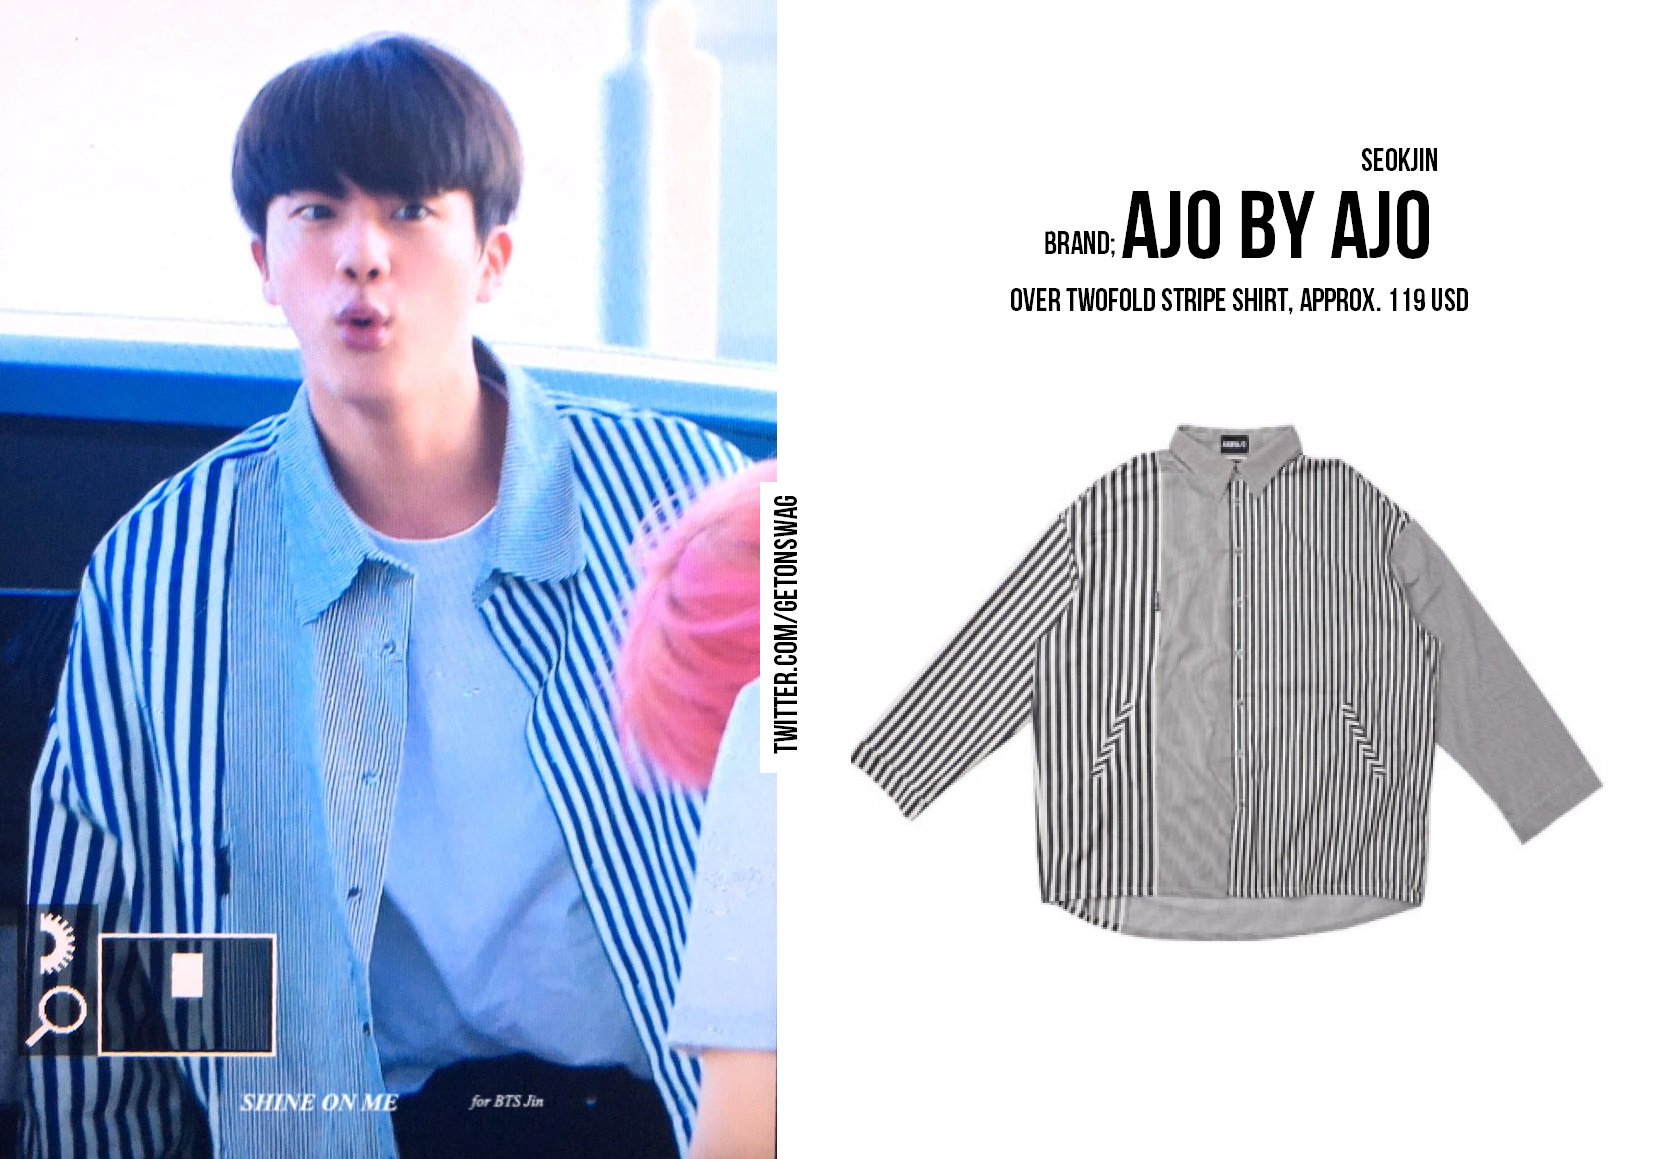 Beyond The Style ✼ Alex ✼ on X: JIN #BTS 171023 airport #JIN #방탄소년단 #진 #석진  VETEMENTS x Hanes White Edition Quick Made Oversized 'Staff' T-Shirt   / X